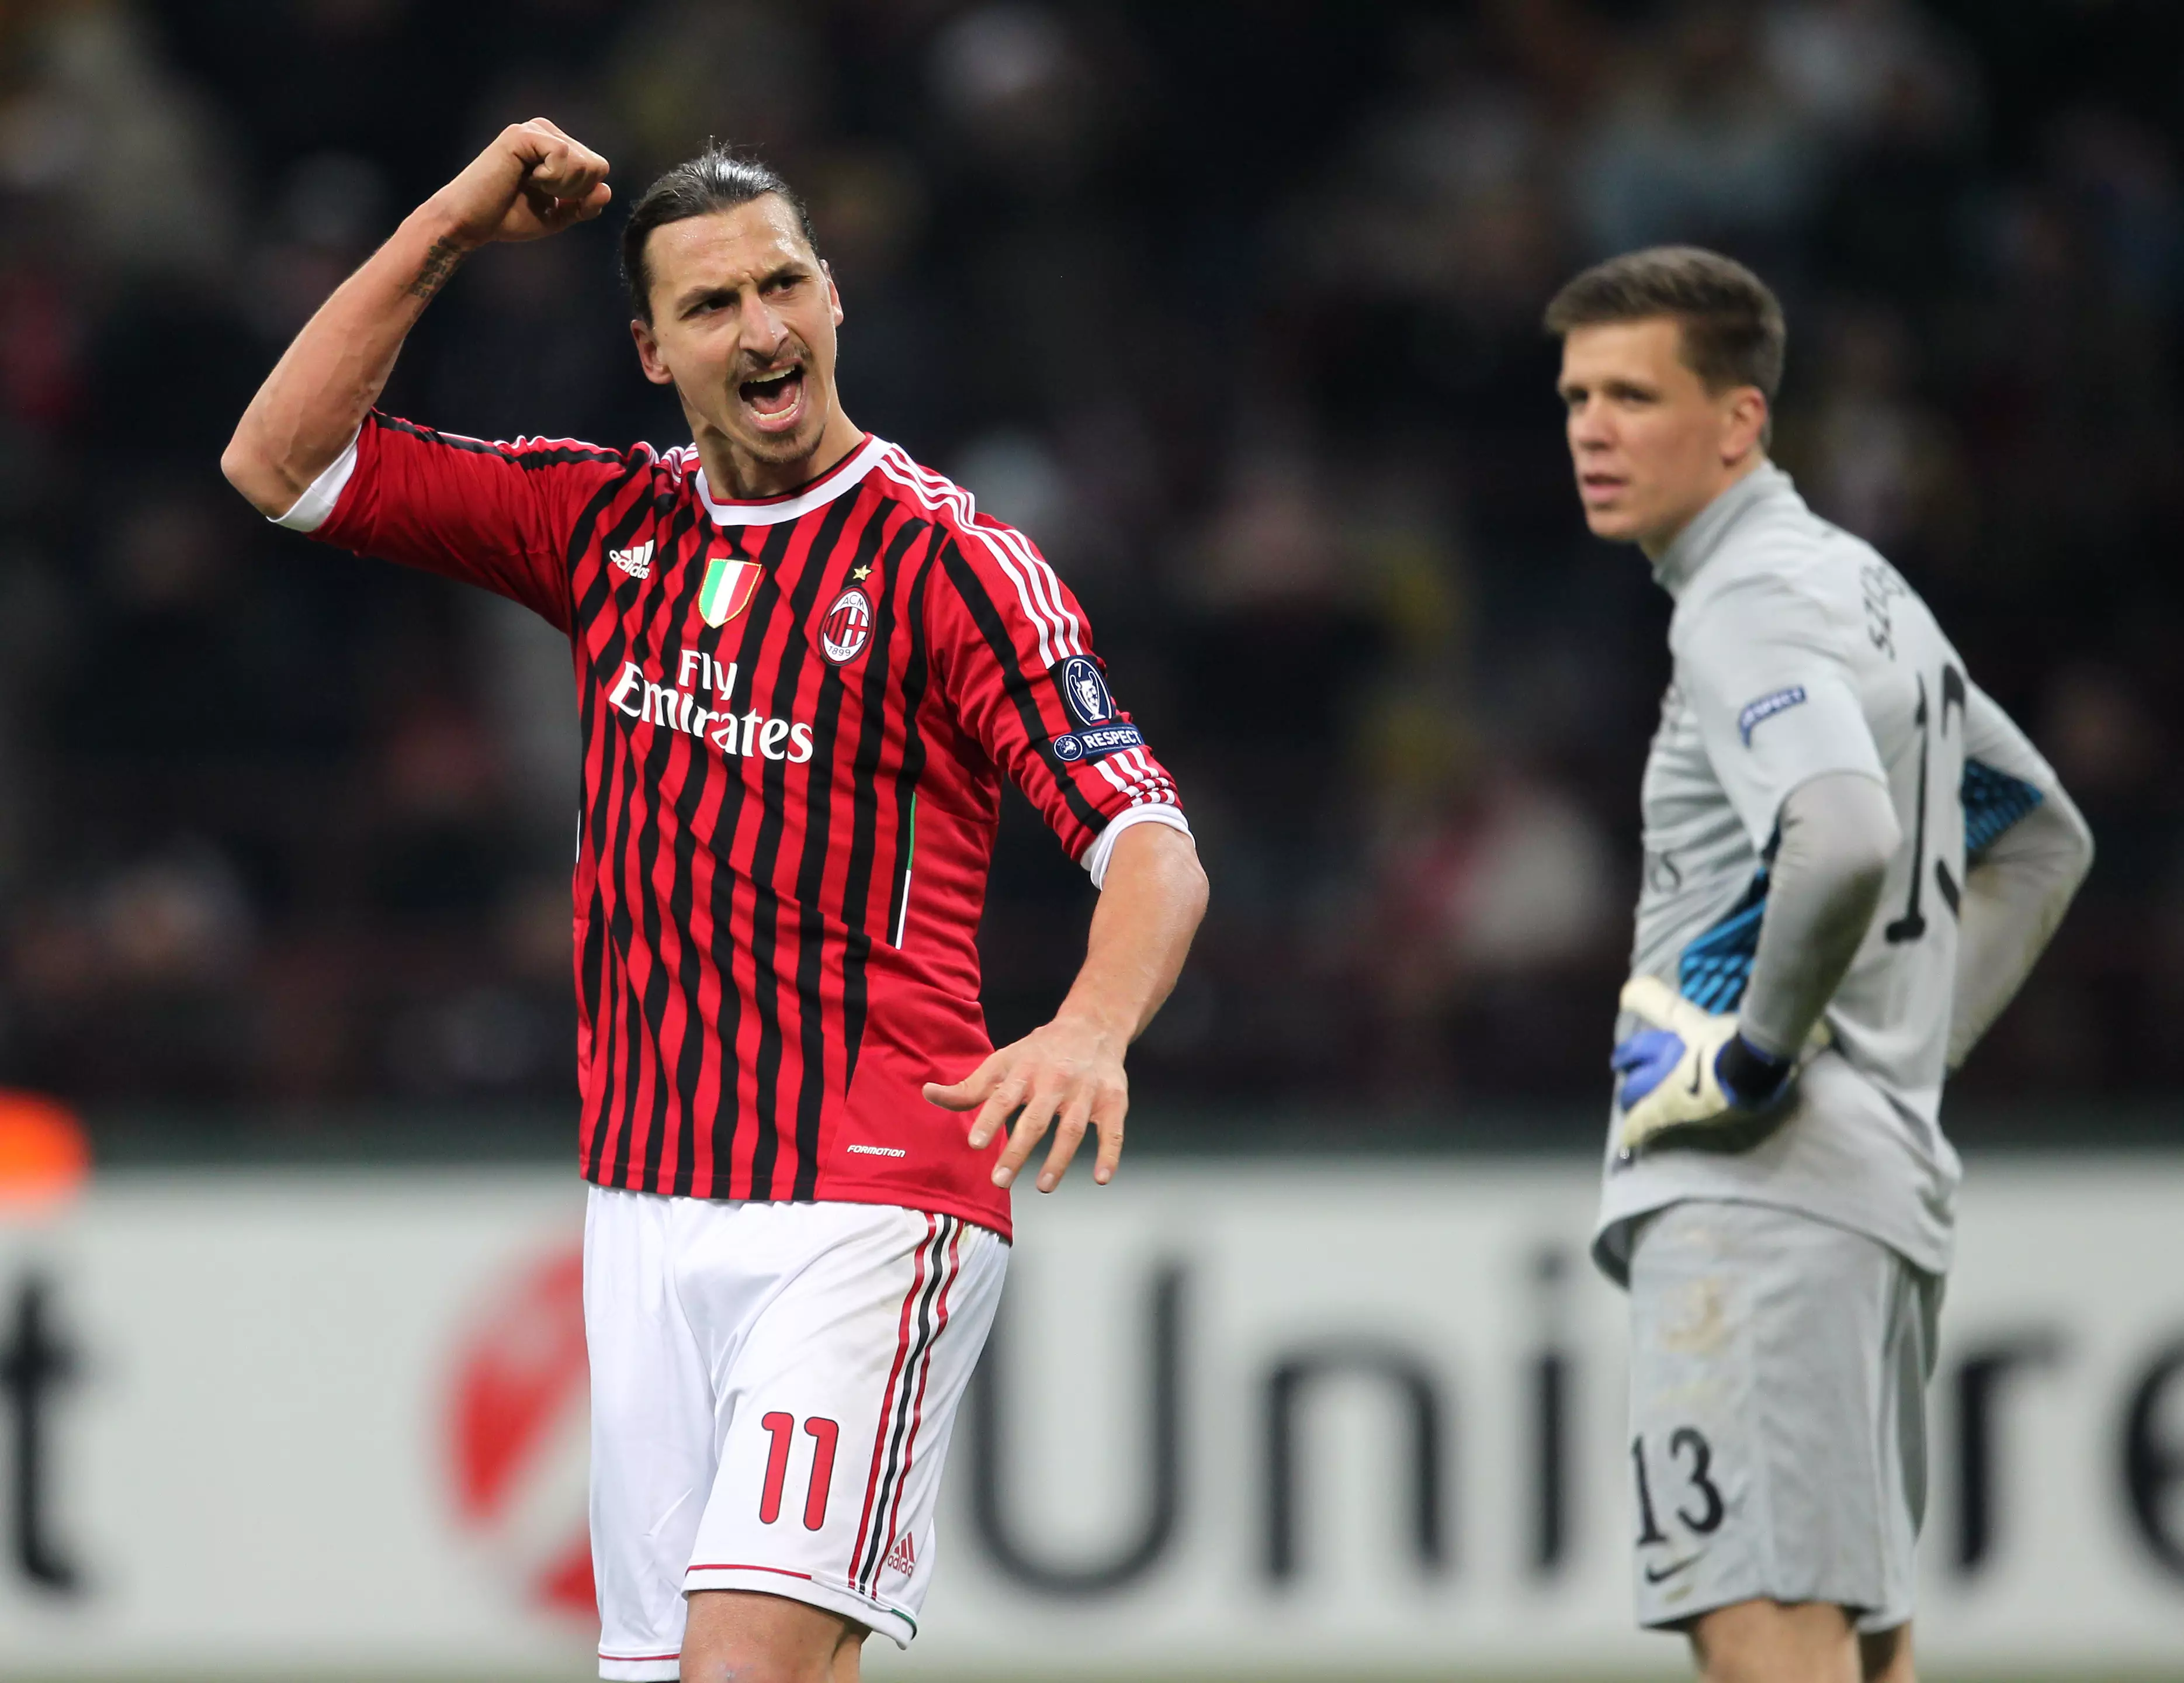 Zlatan has had a stint at AC Milan in the past and helped them to the Serie A title in 2011. (Image